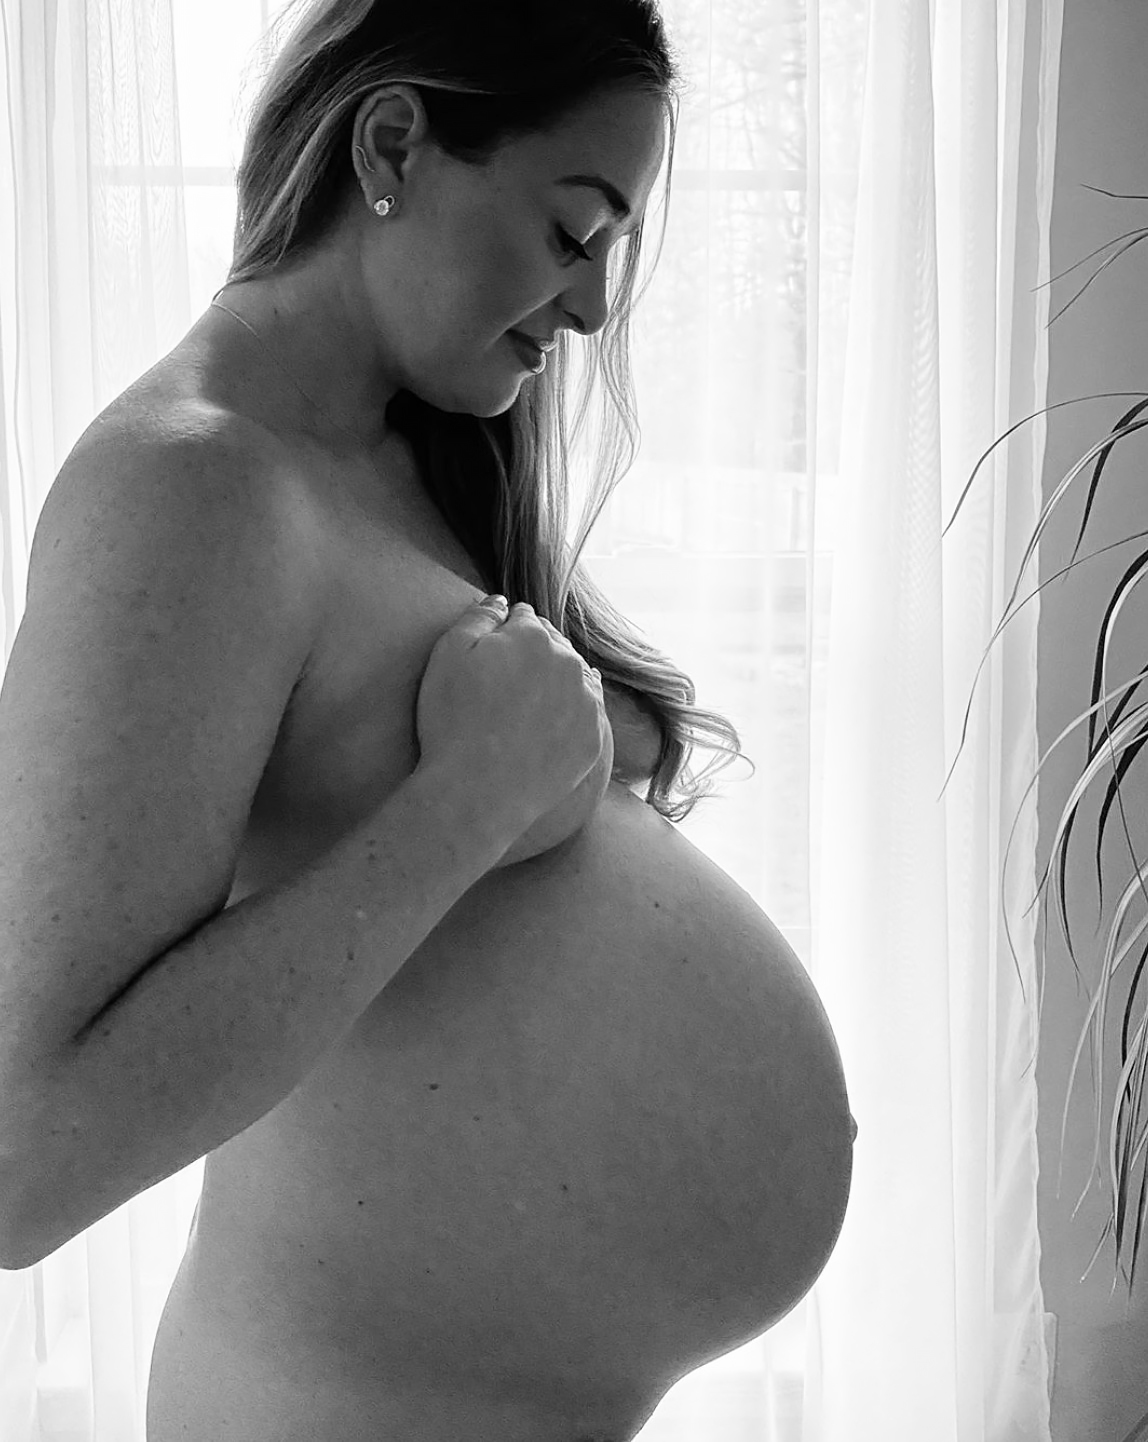 Scared Pregnant Nude - Celebrities Posing Nude While Pregnant: Maternity Pics